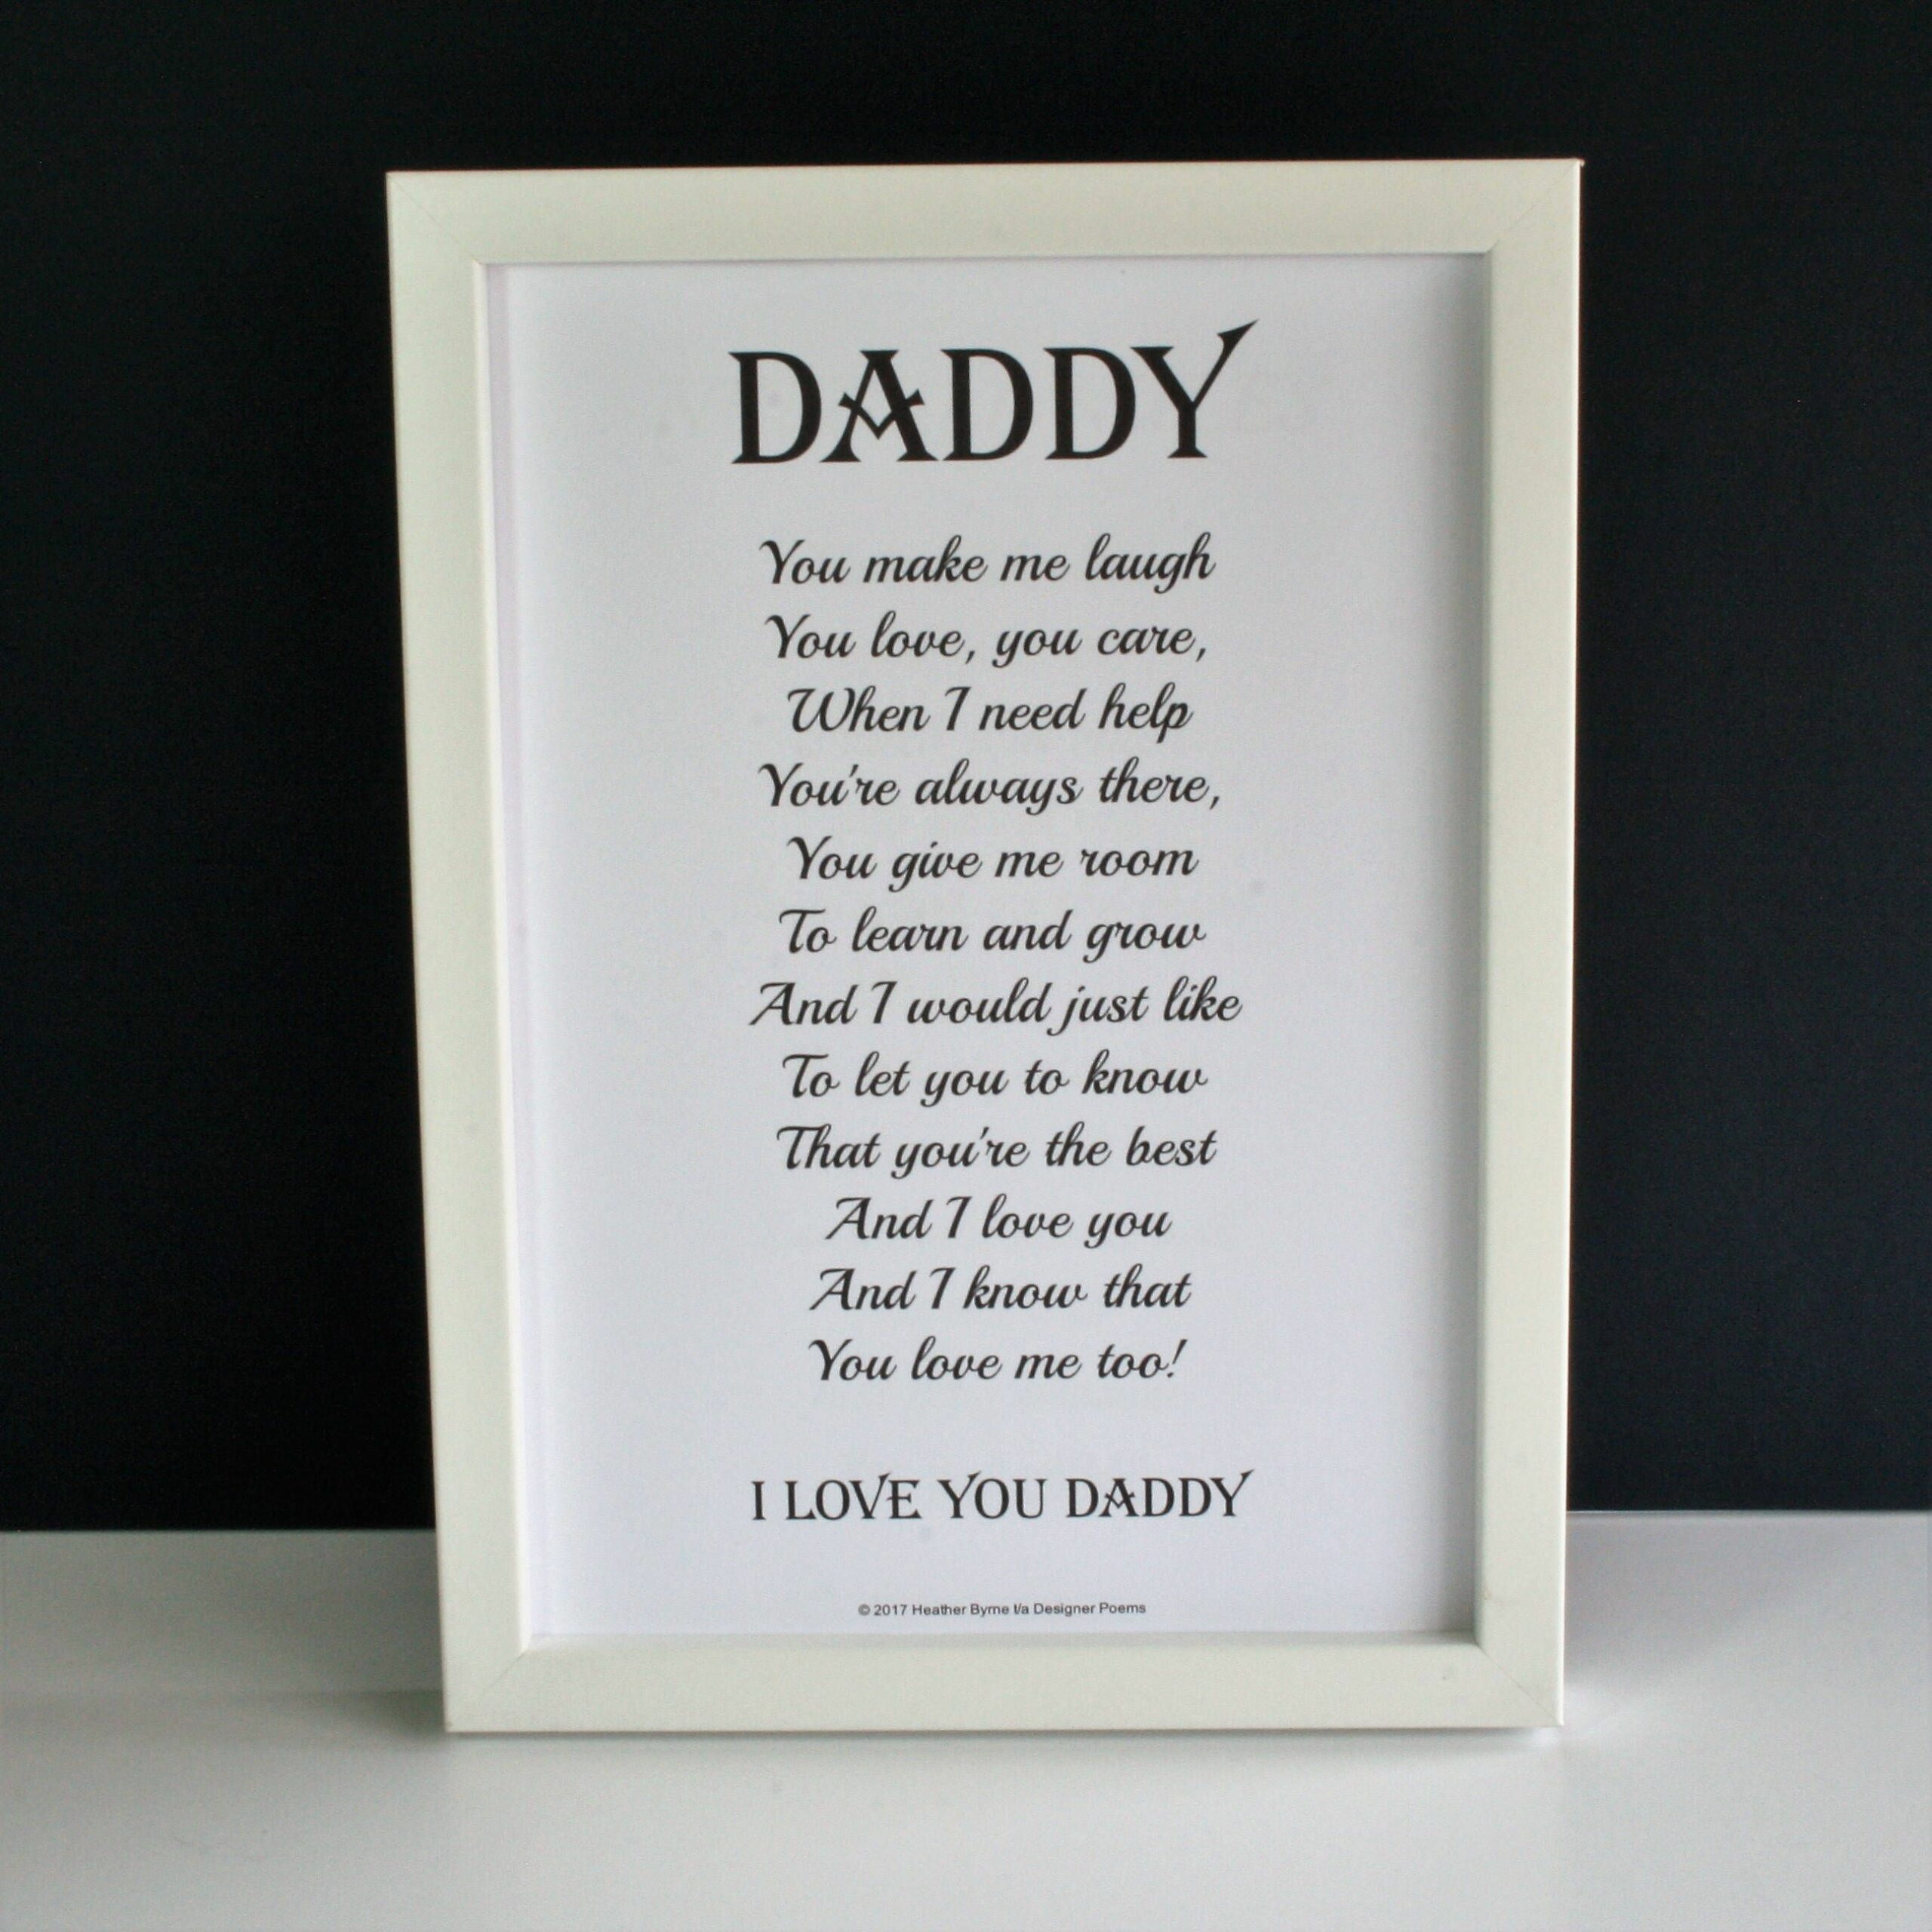 Compose a Poem - Best Ways to Celebrate Father’s Day